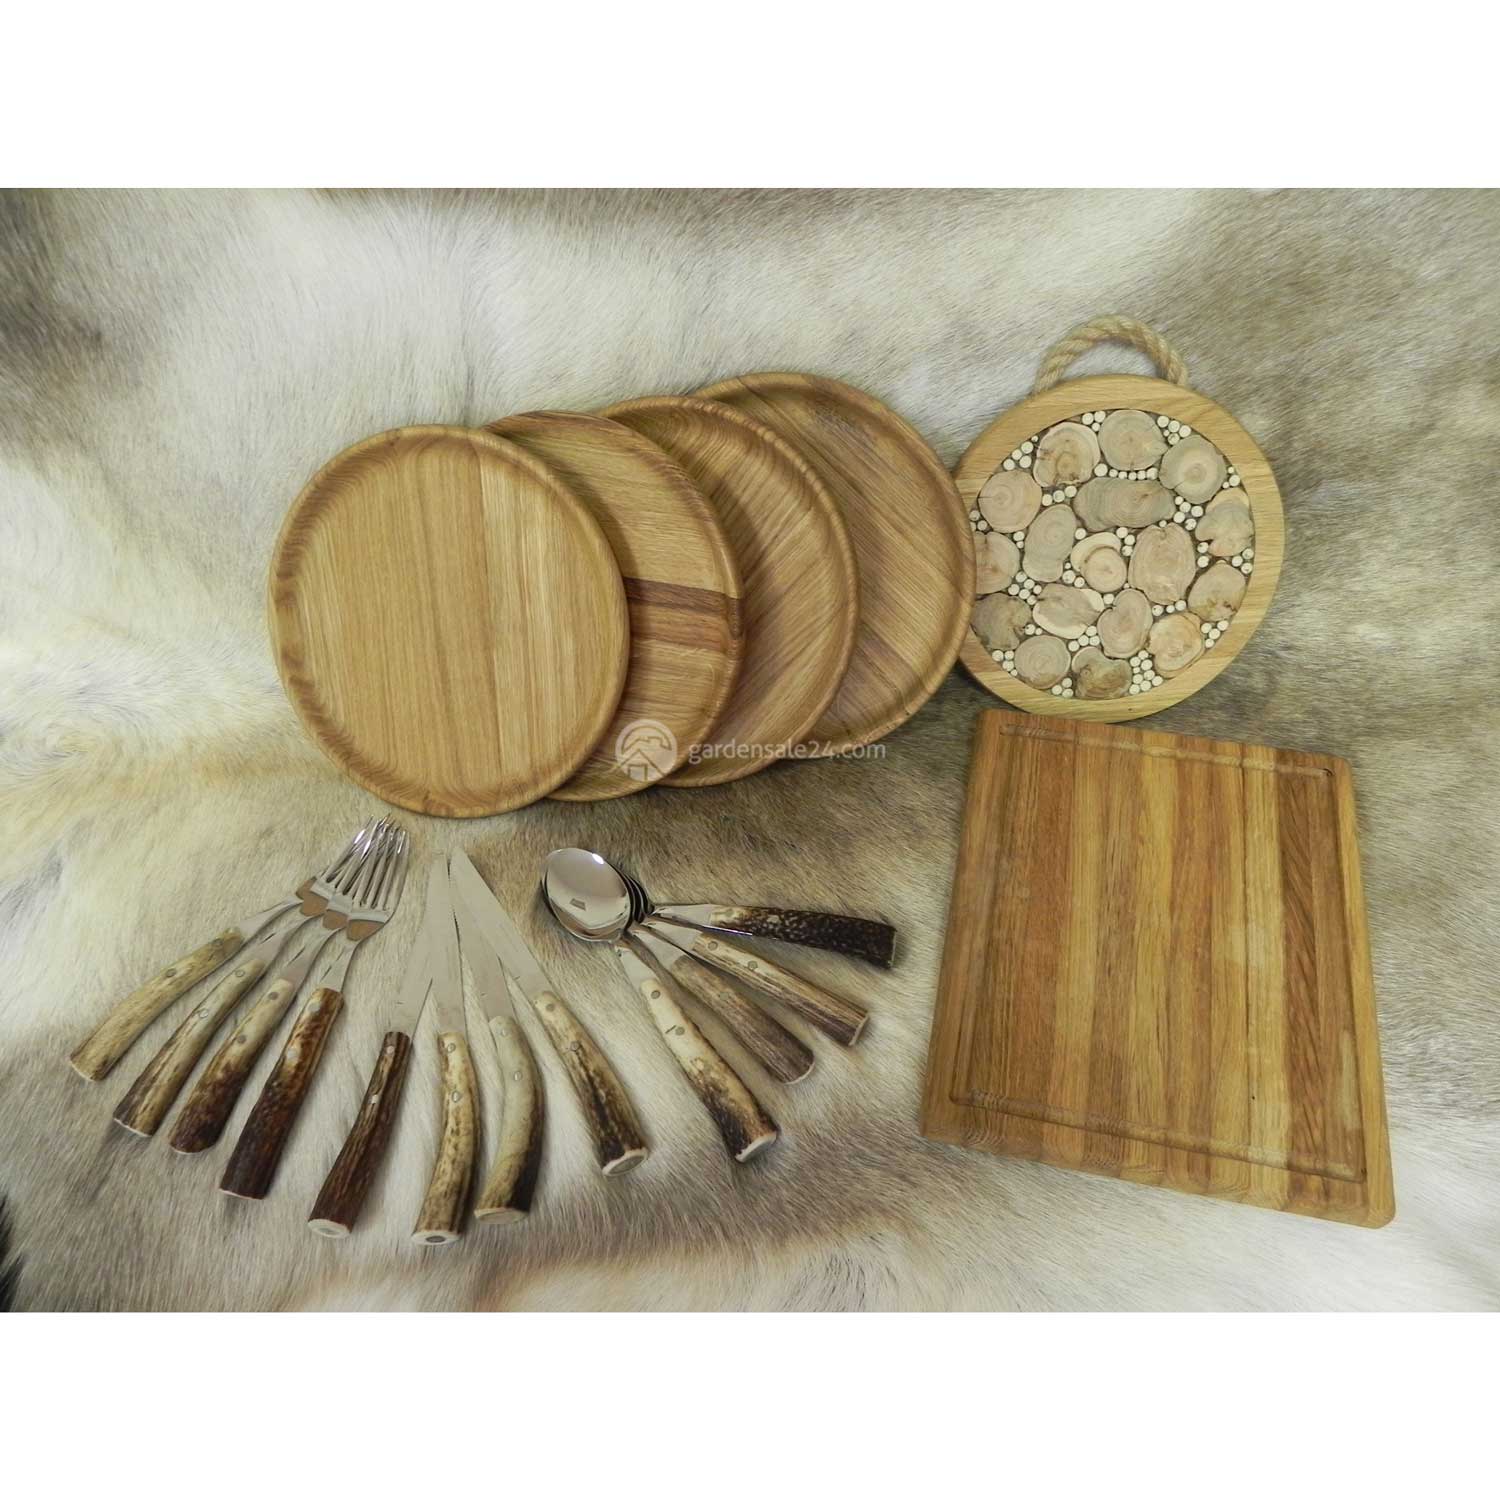 Wooden Dishes And Flatware Set "OPTIMAL"